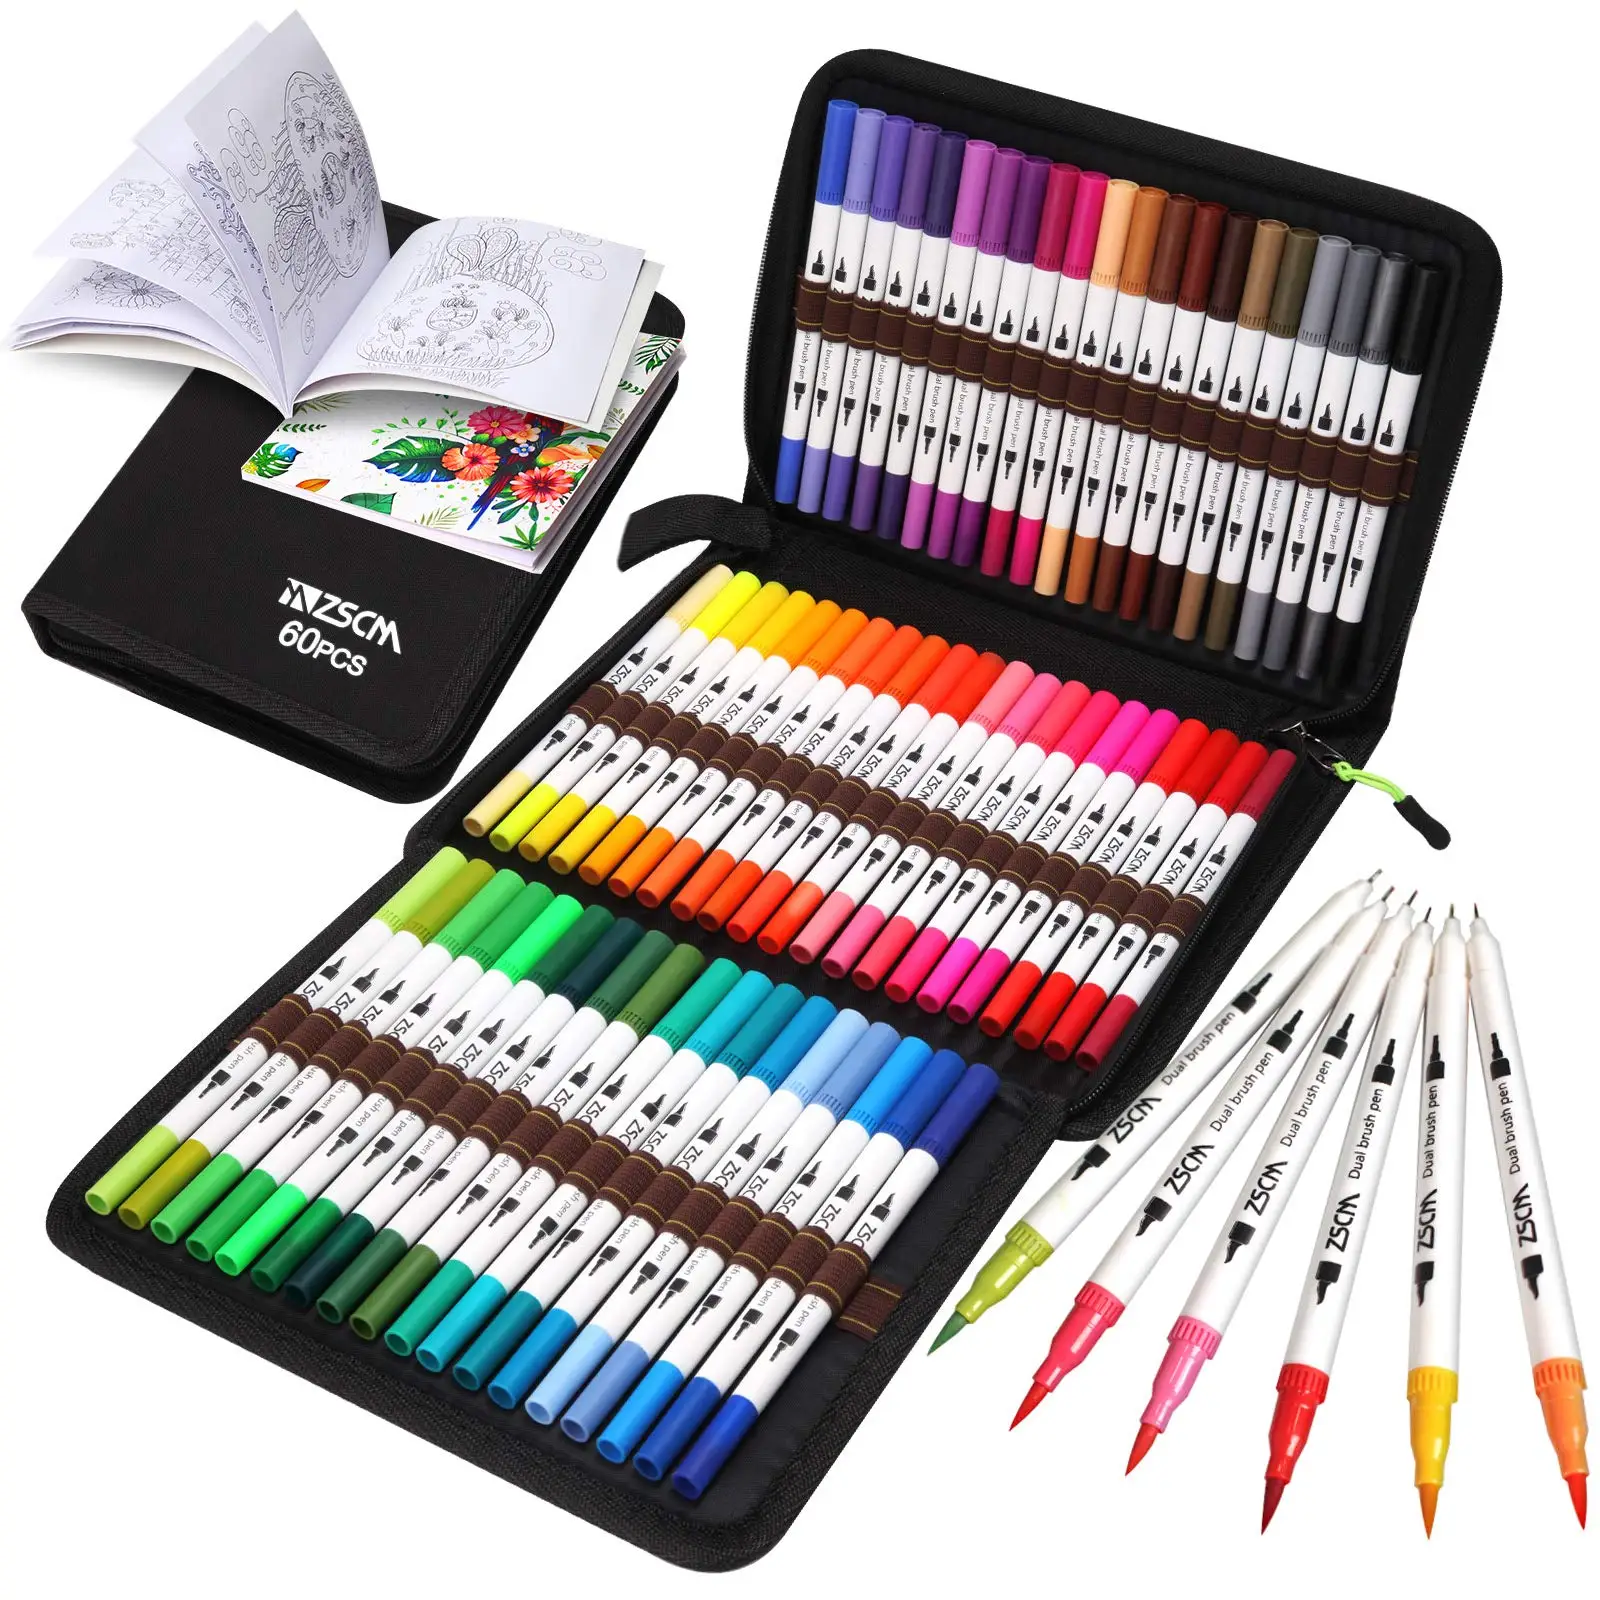 https://ae01.alicdn.com/kf/H747bc84e5b8b4fbfa68c2cccd1f0015bg/12-160-Colors-Brush-Pens-Markers-Set-Dual-Tips-Fine-Drawing-Adult-Coloring-Books-Sketching-Planner.jpg